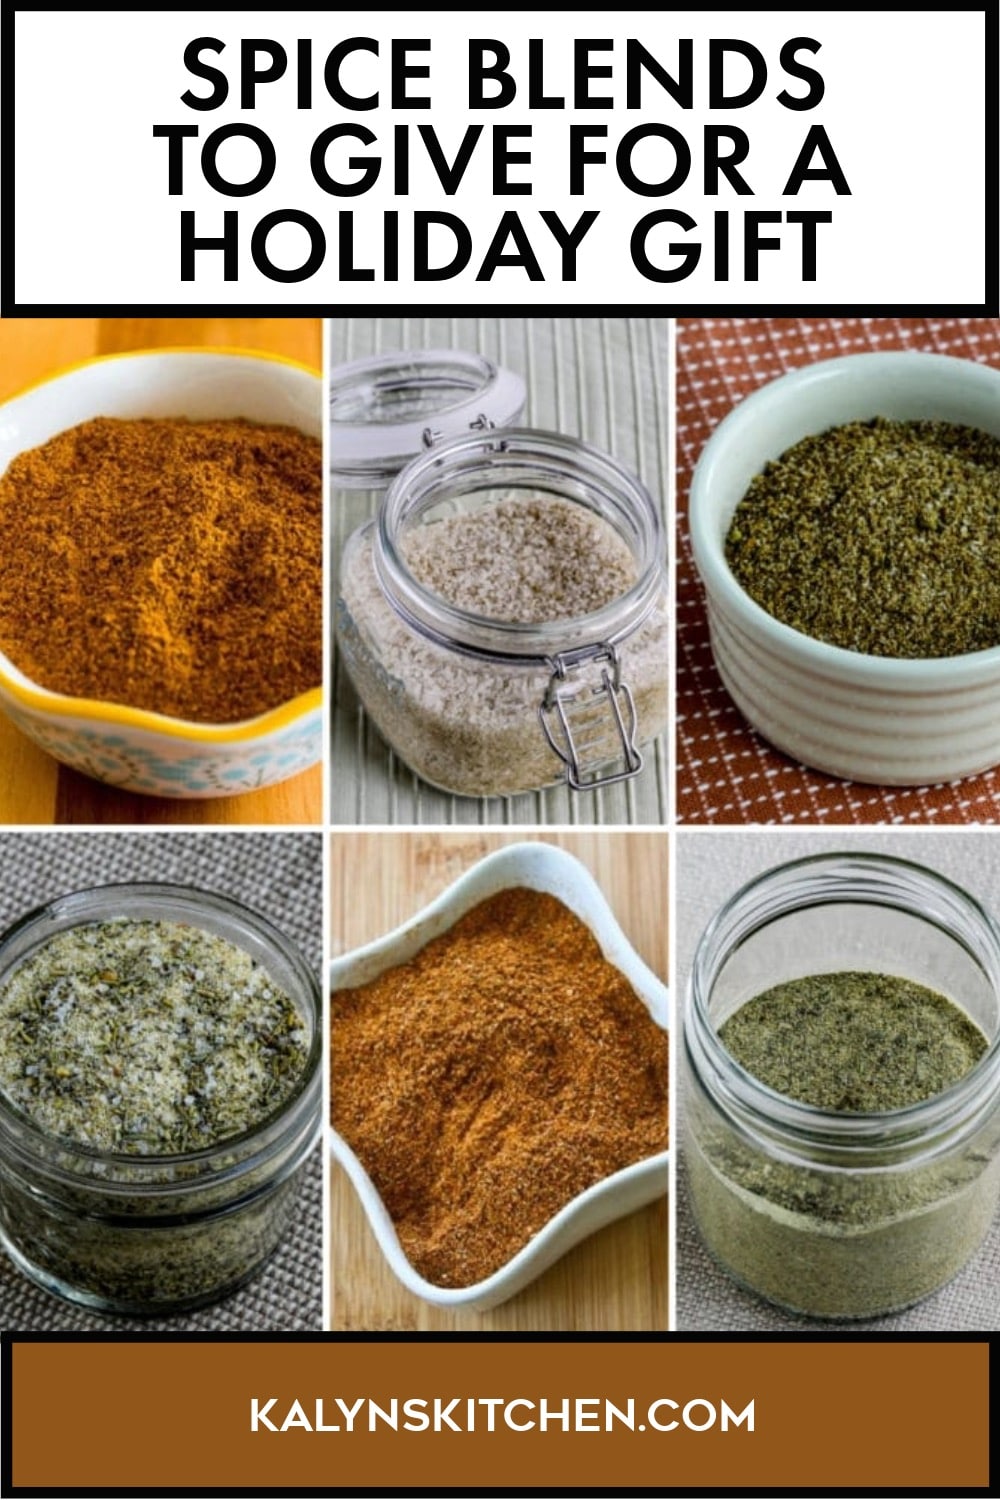 Pinterest image of Spice Blends to Give for a Holiday Gift